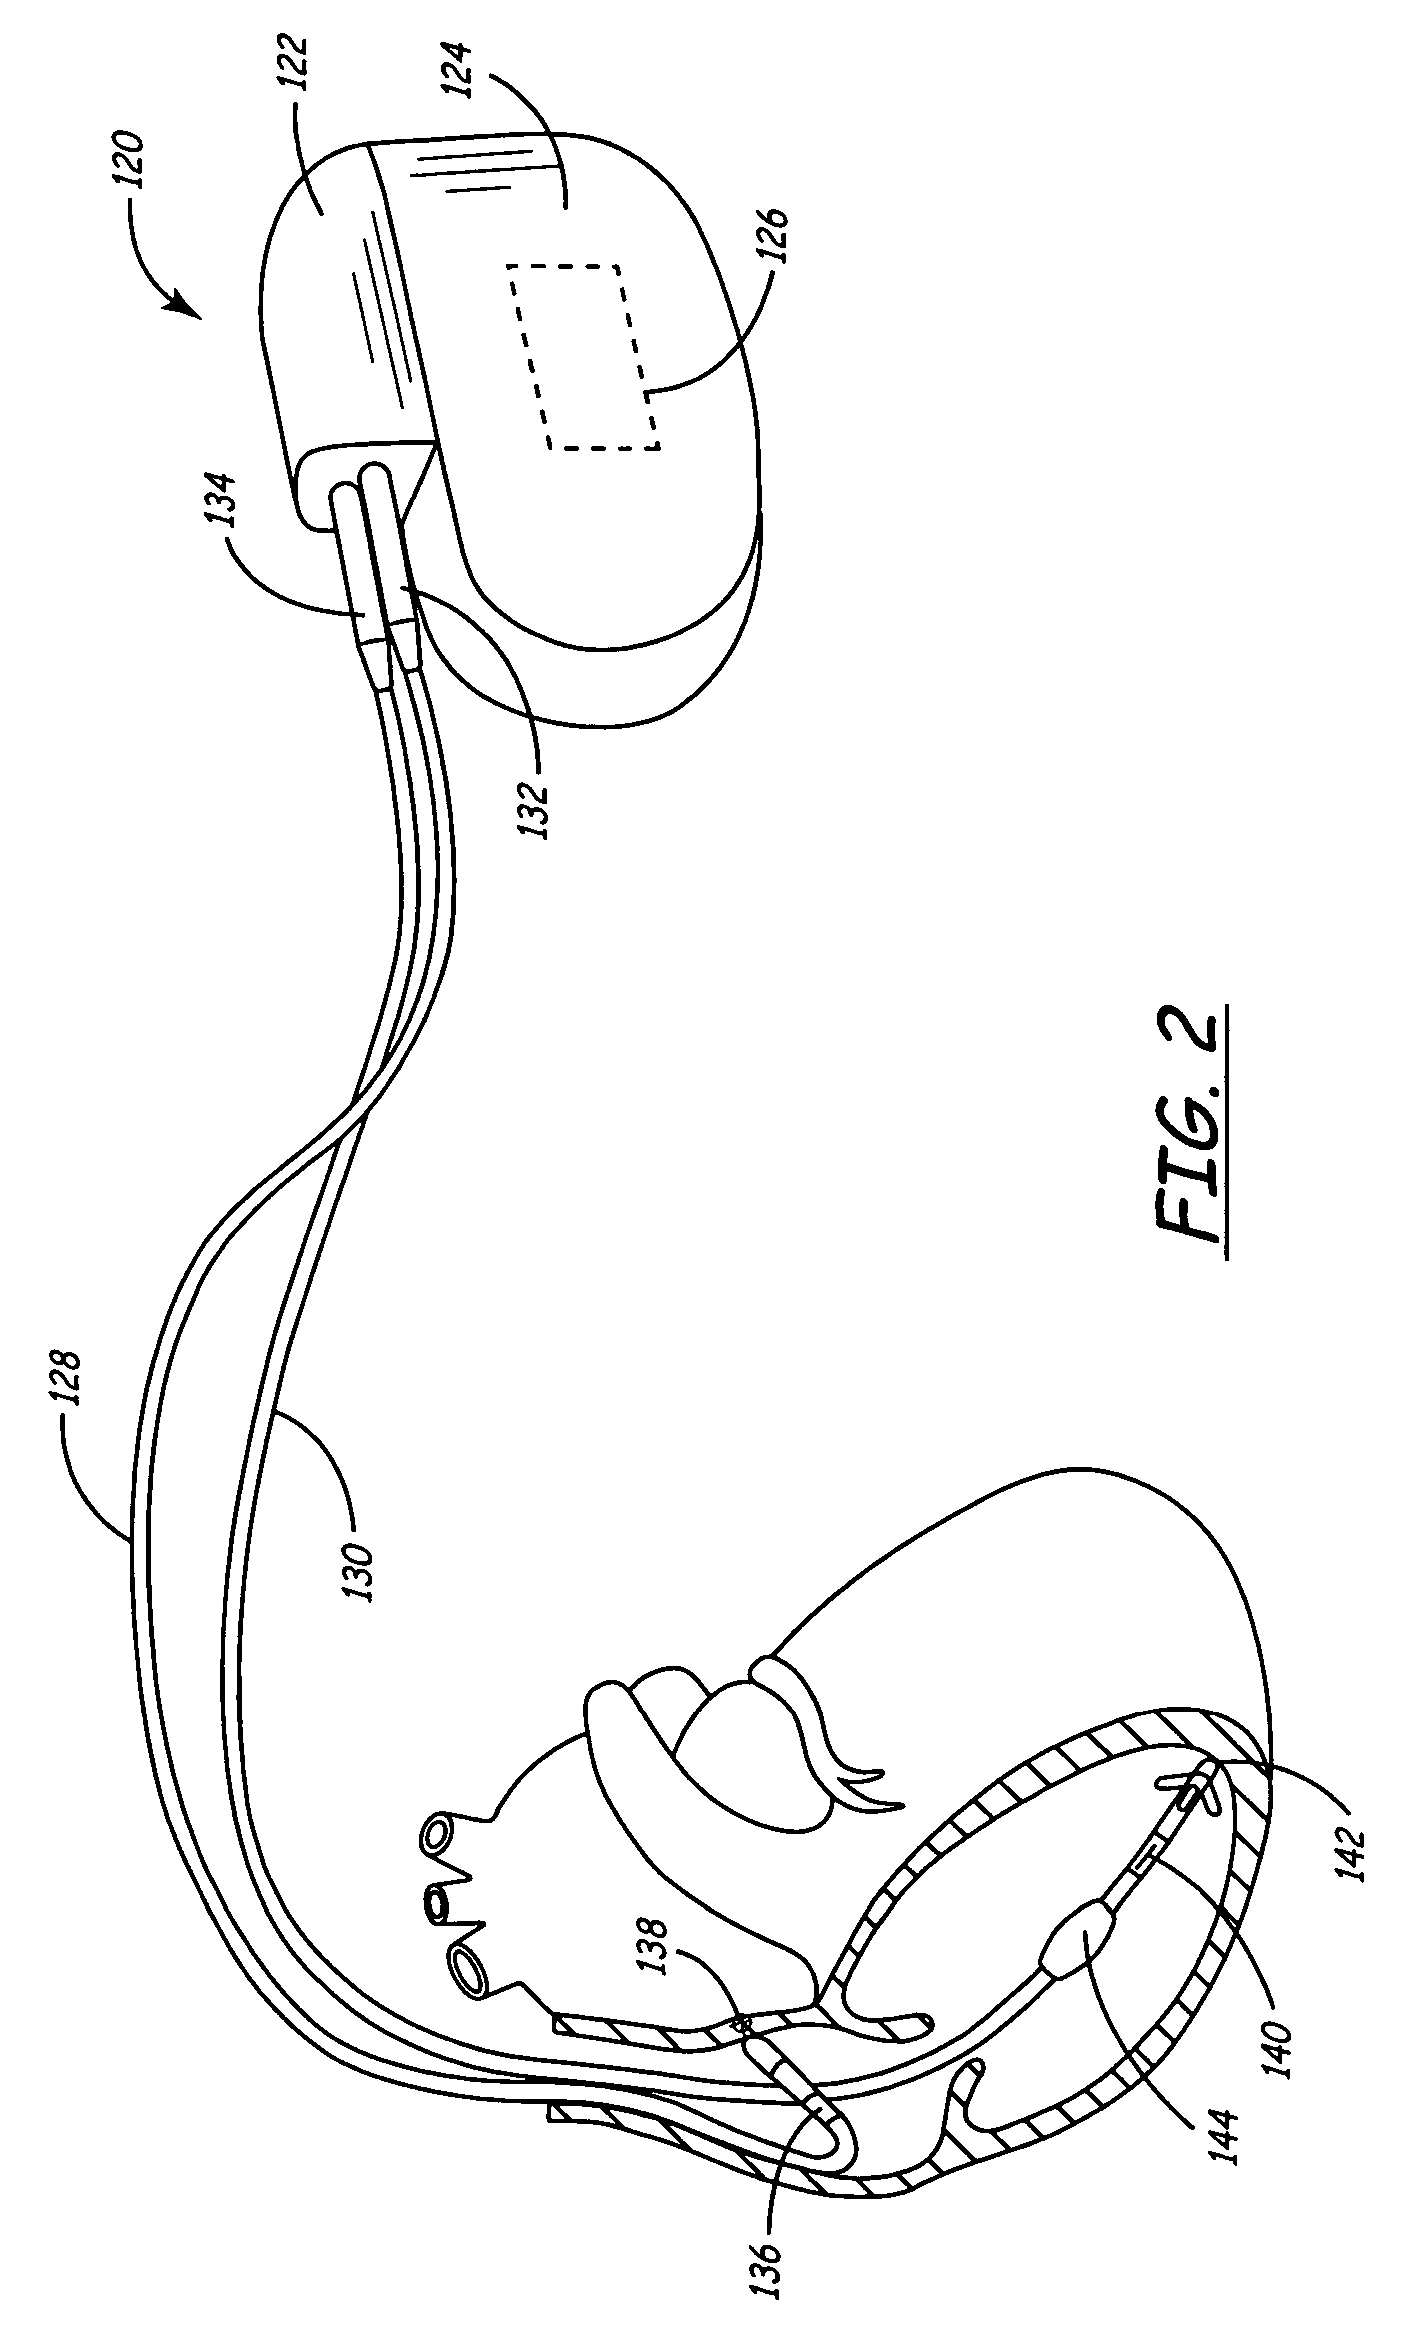 Method and apparatus for temporarily varying a parameter in an implantable medical device